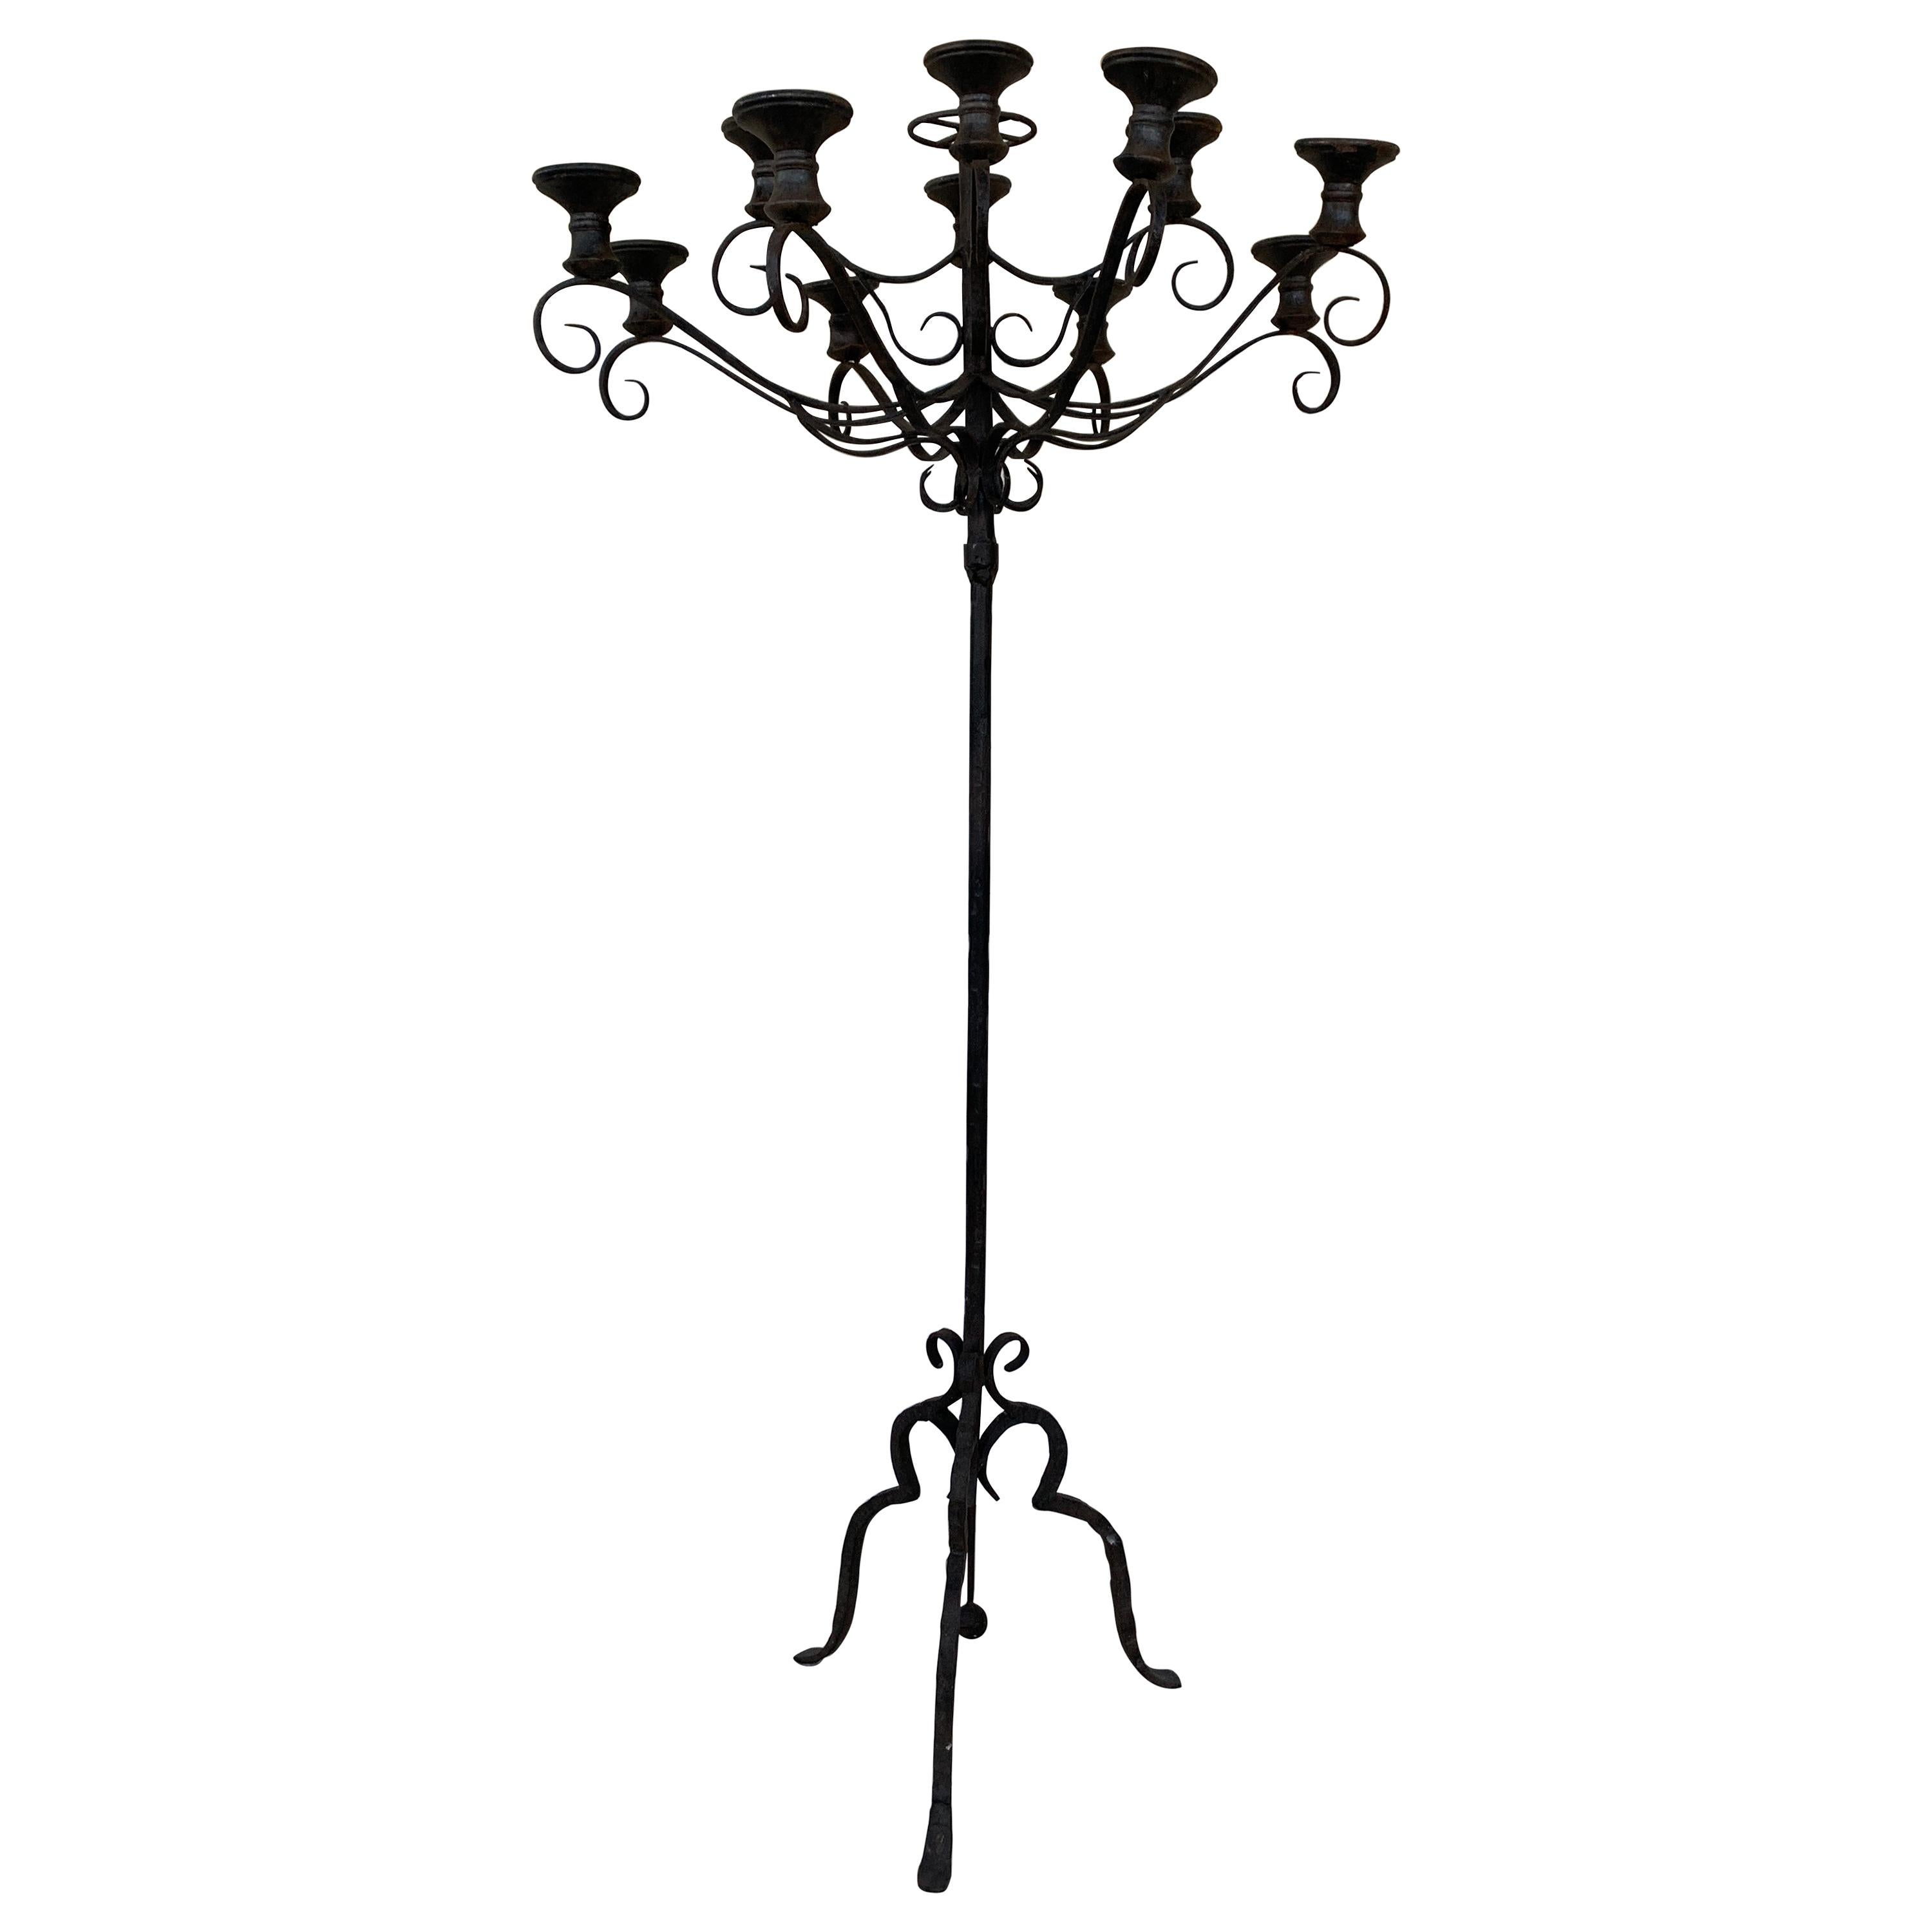 Metal Candle Holder Rustic Hand-Forged Wrought Iron 2 Arm Candelabra 1960s Swedish Christmas